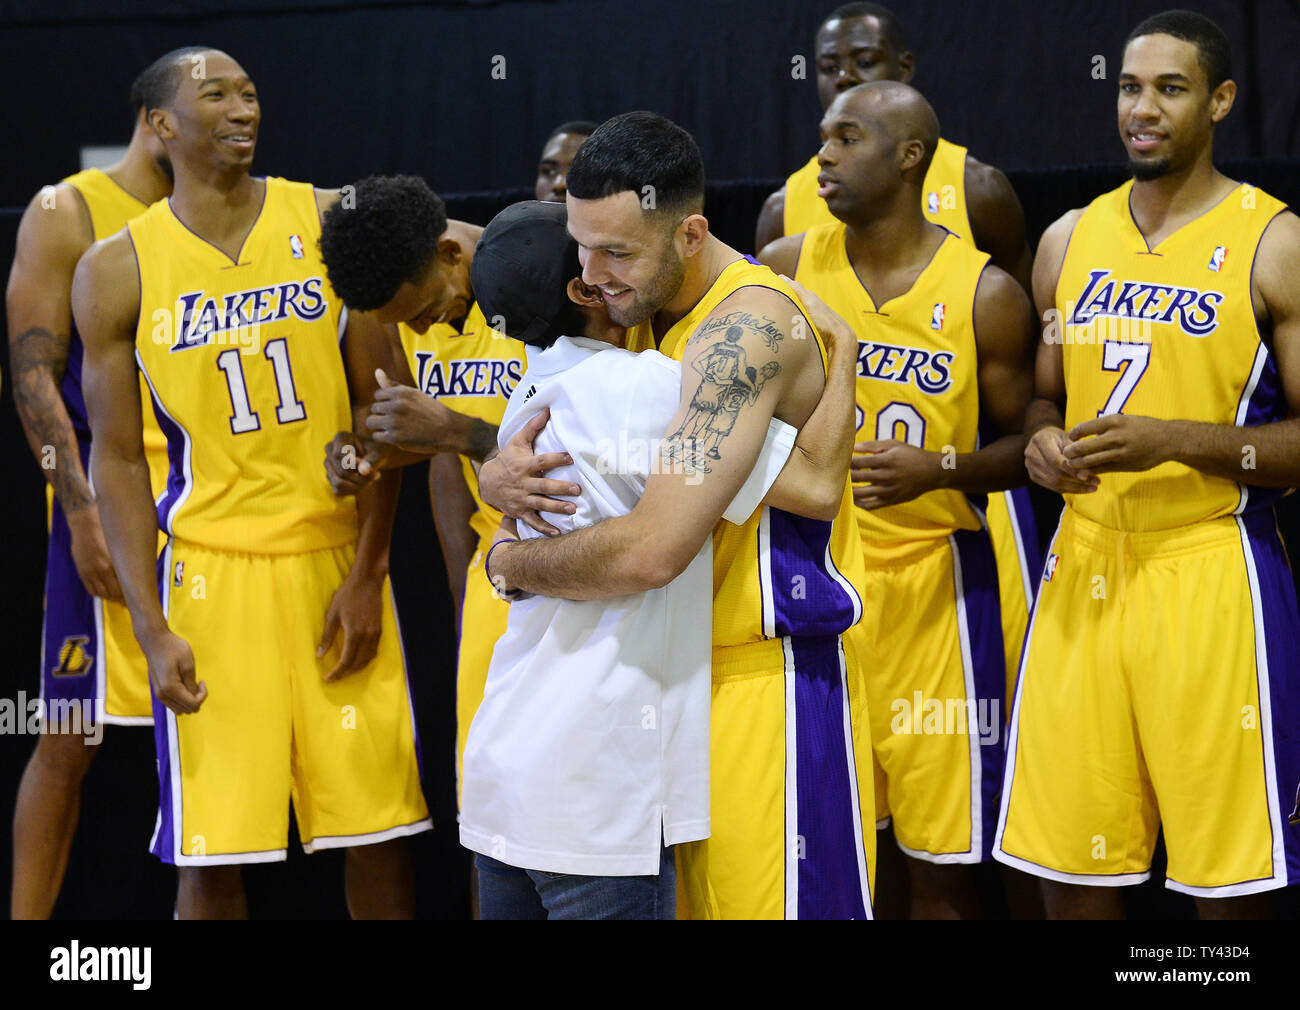 Los Angeles Lakers' Jordan Farmar (1) embraces the Lakers' videographer as  the team gathers to participate in the basketball team's media day at the  Lakers training facility in El Segundo, California on